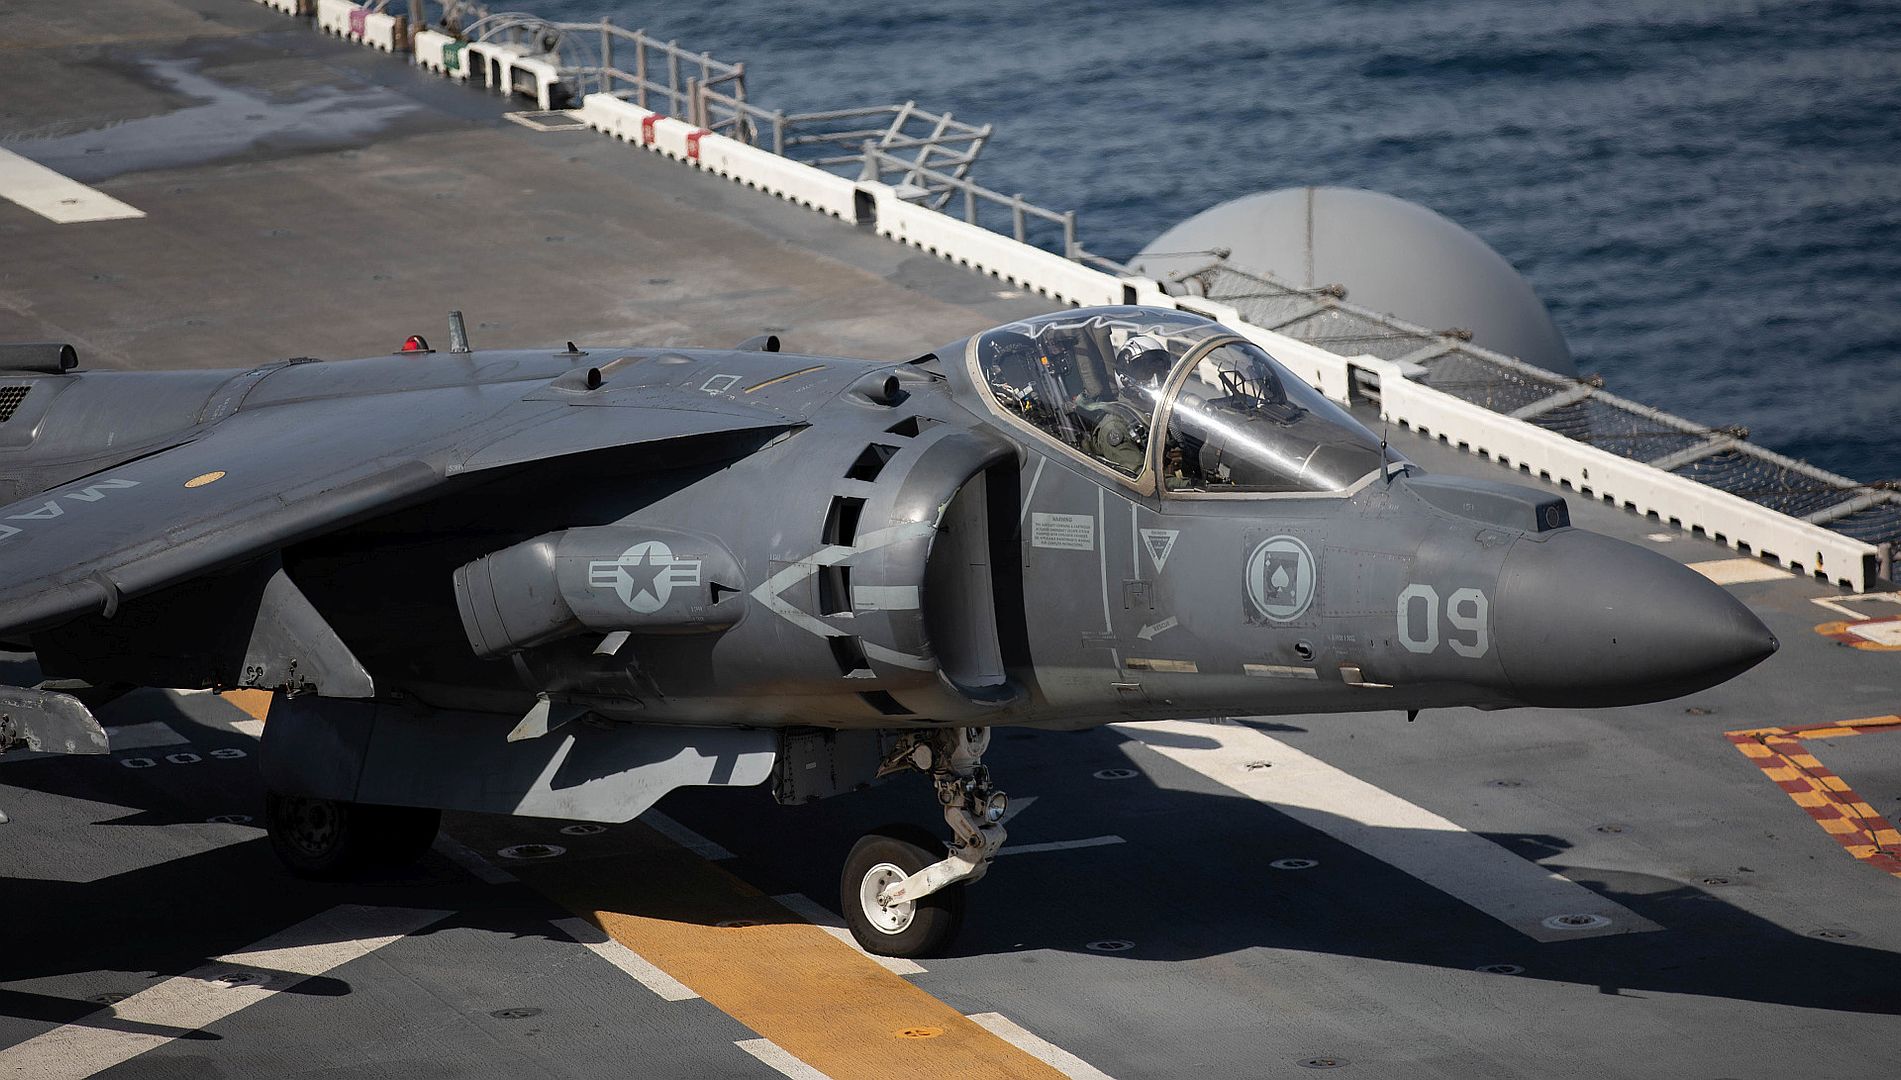 8B Harrier Assigned To The Marine Attack Squadron 231 Maneuvers On The Flight Deck Of The Amphibious Assault Ship USS Bataan